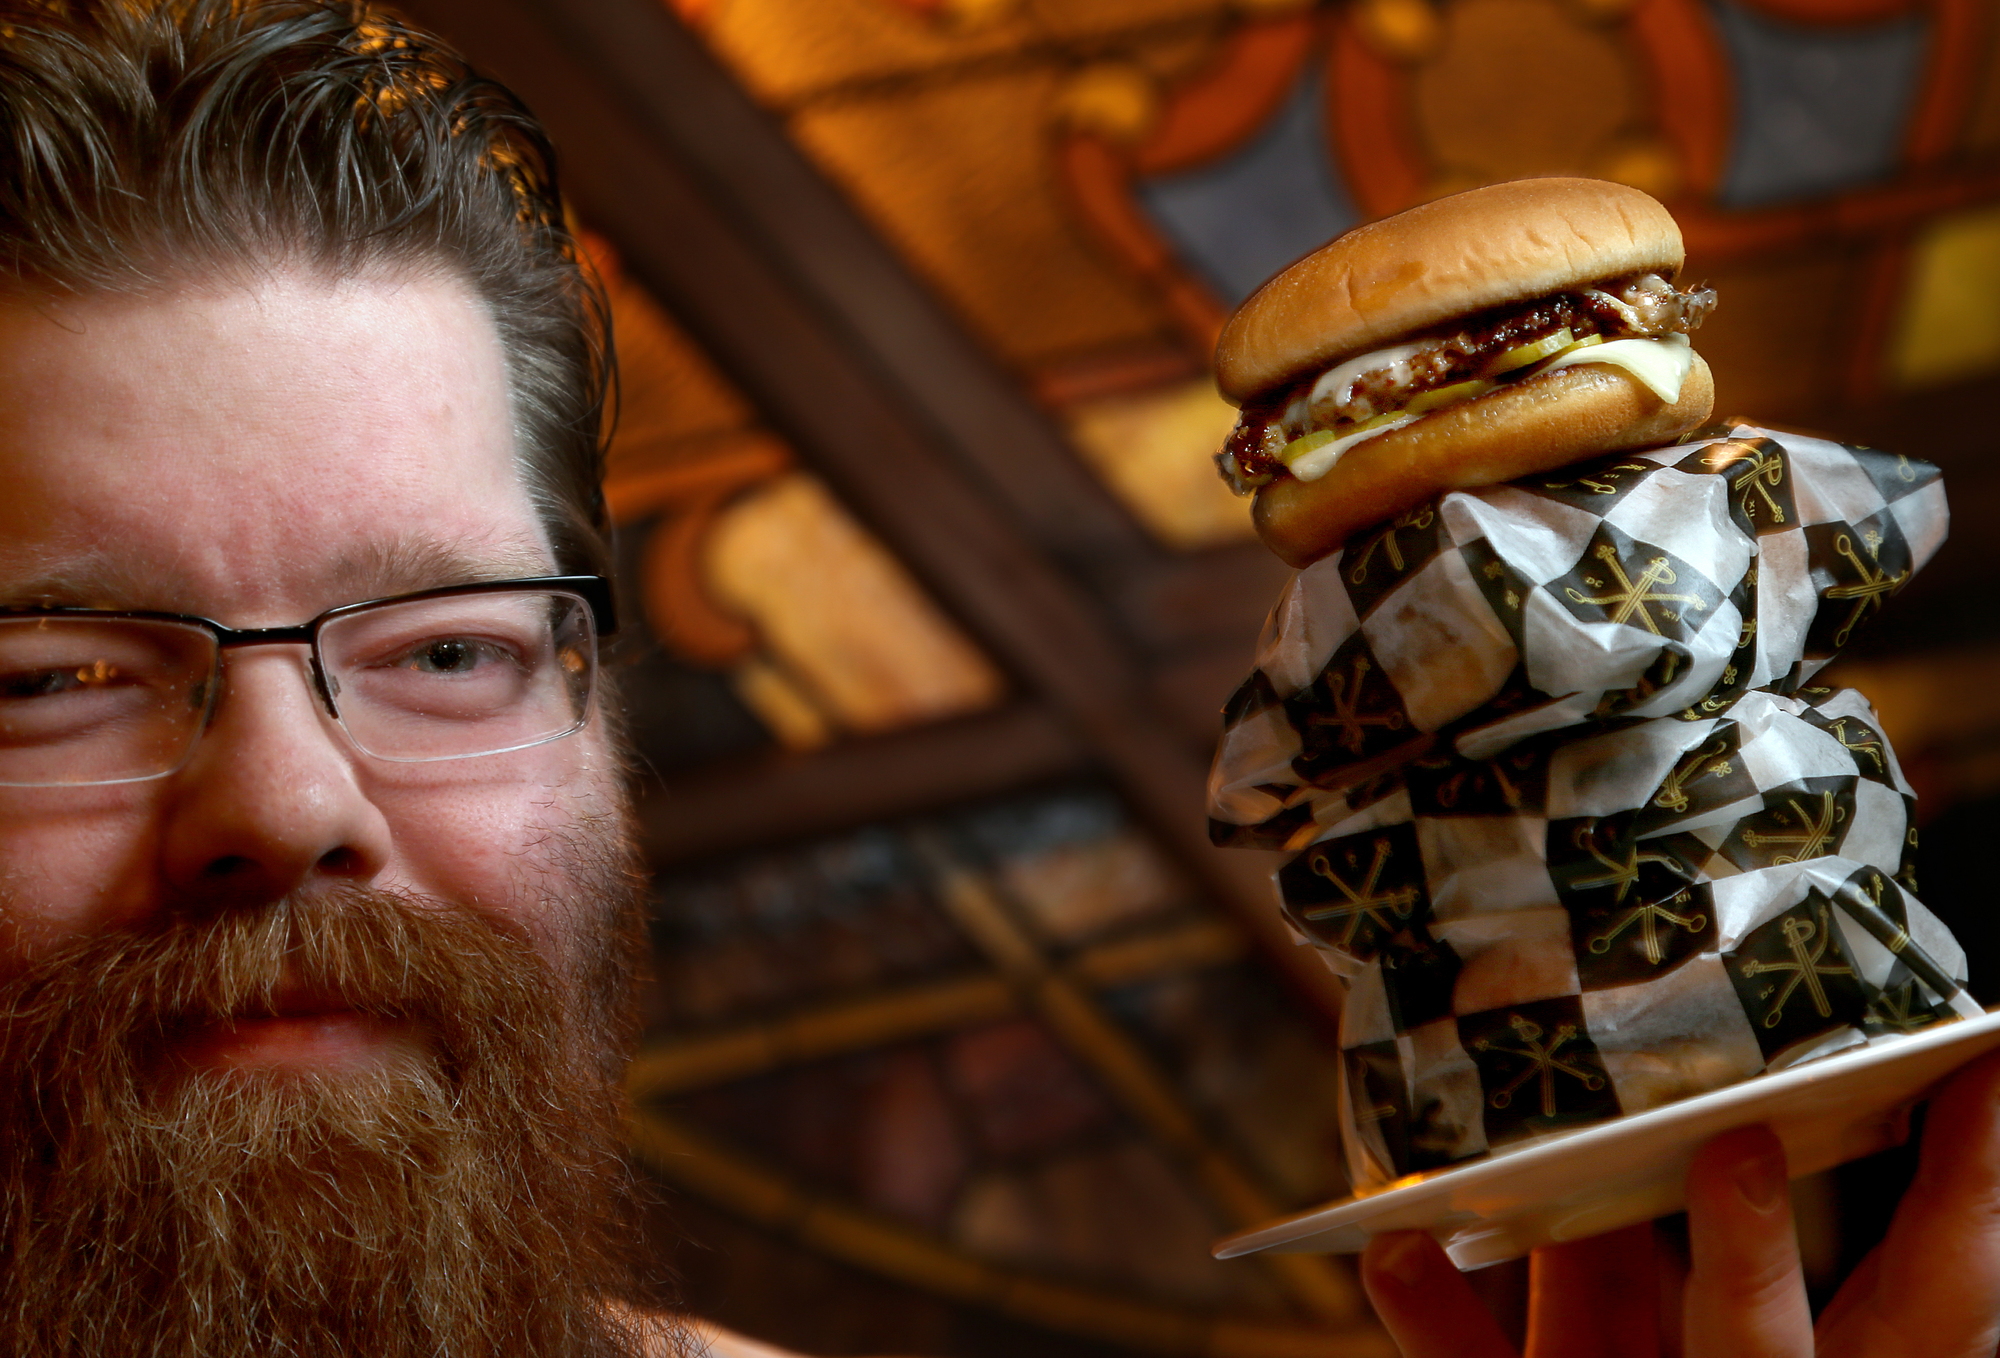 Constantine chef Michael DeCamp uses McDonald’s as a template for his $5 single-patty cheeseburger.